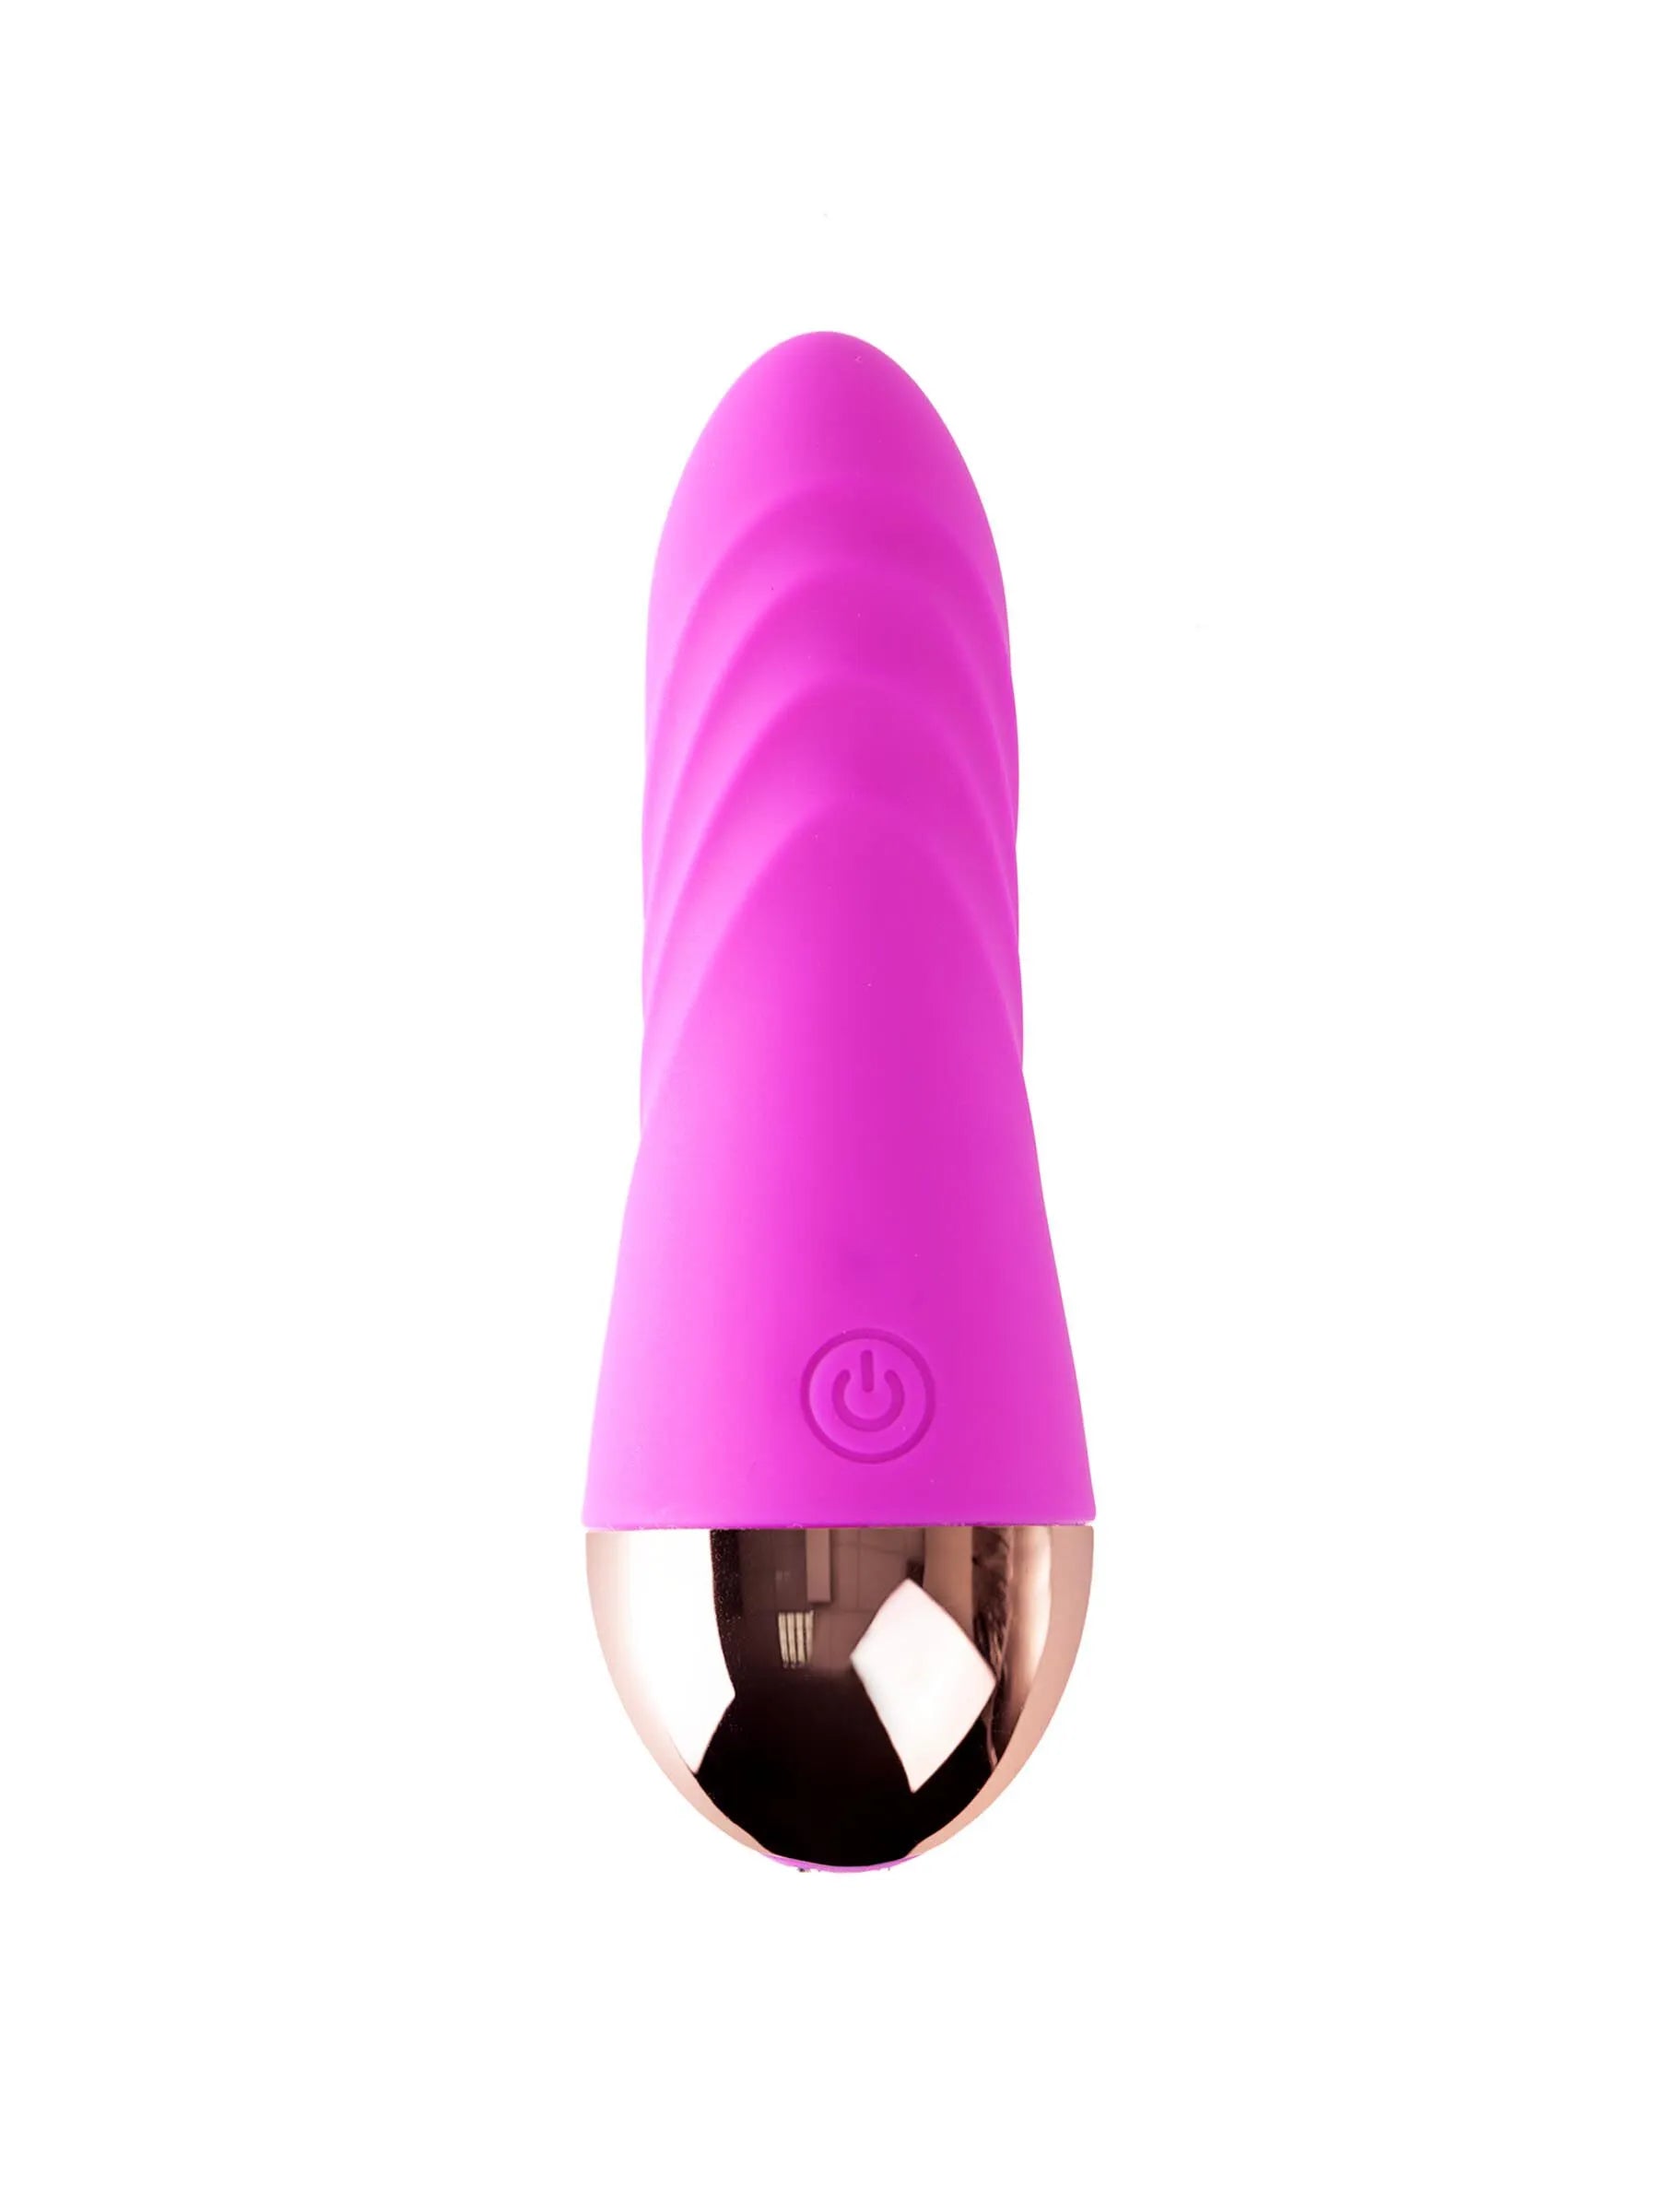 Moregasm Plus Bullet From Ann Summers, Image 0